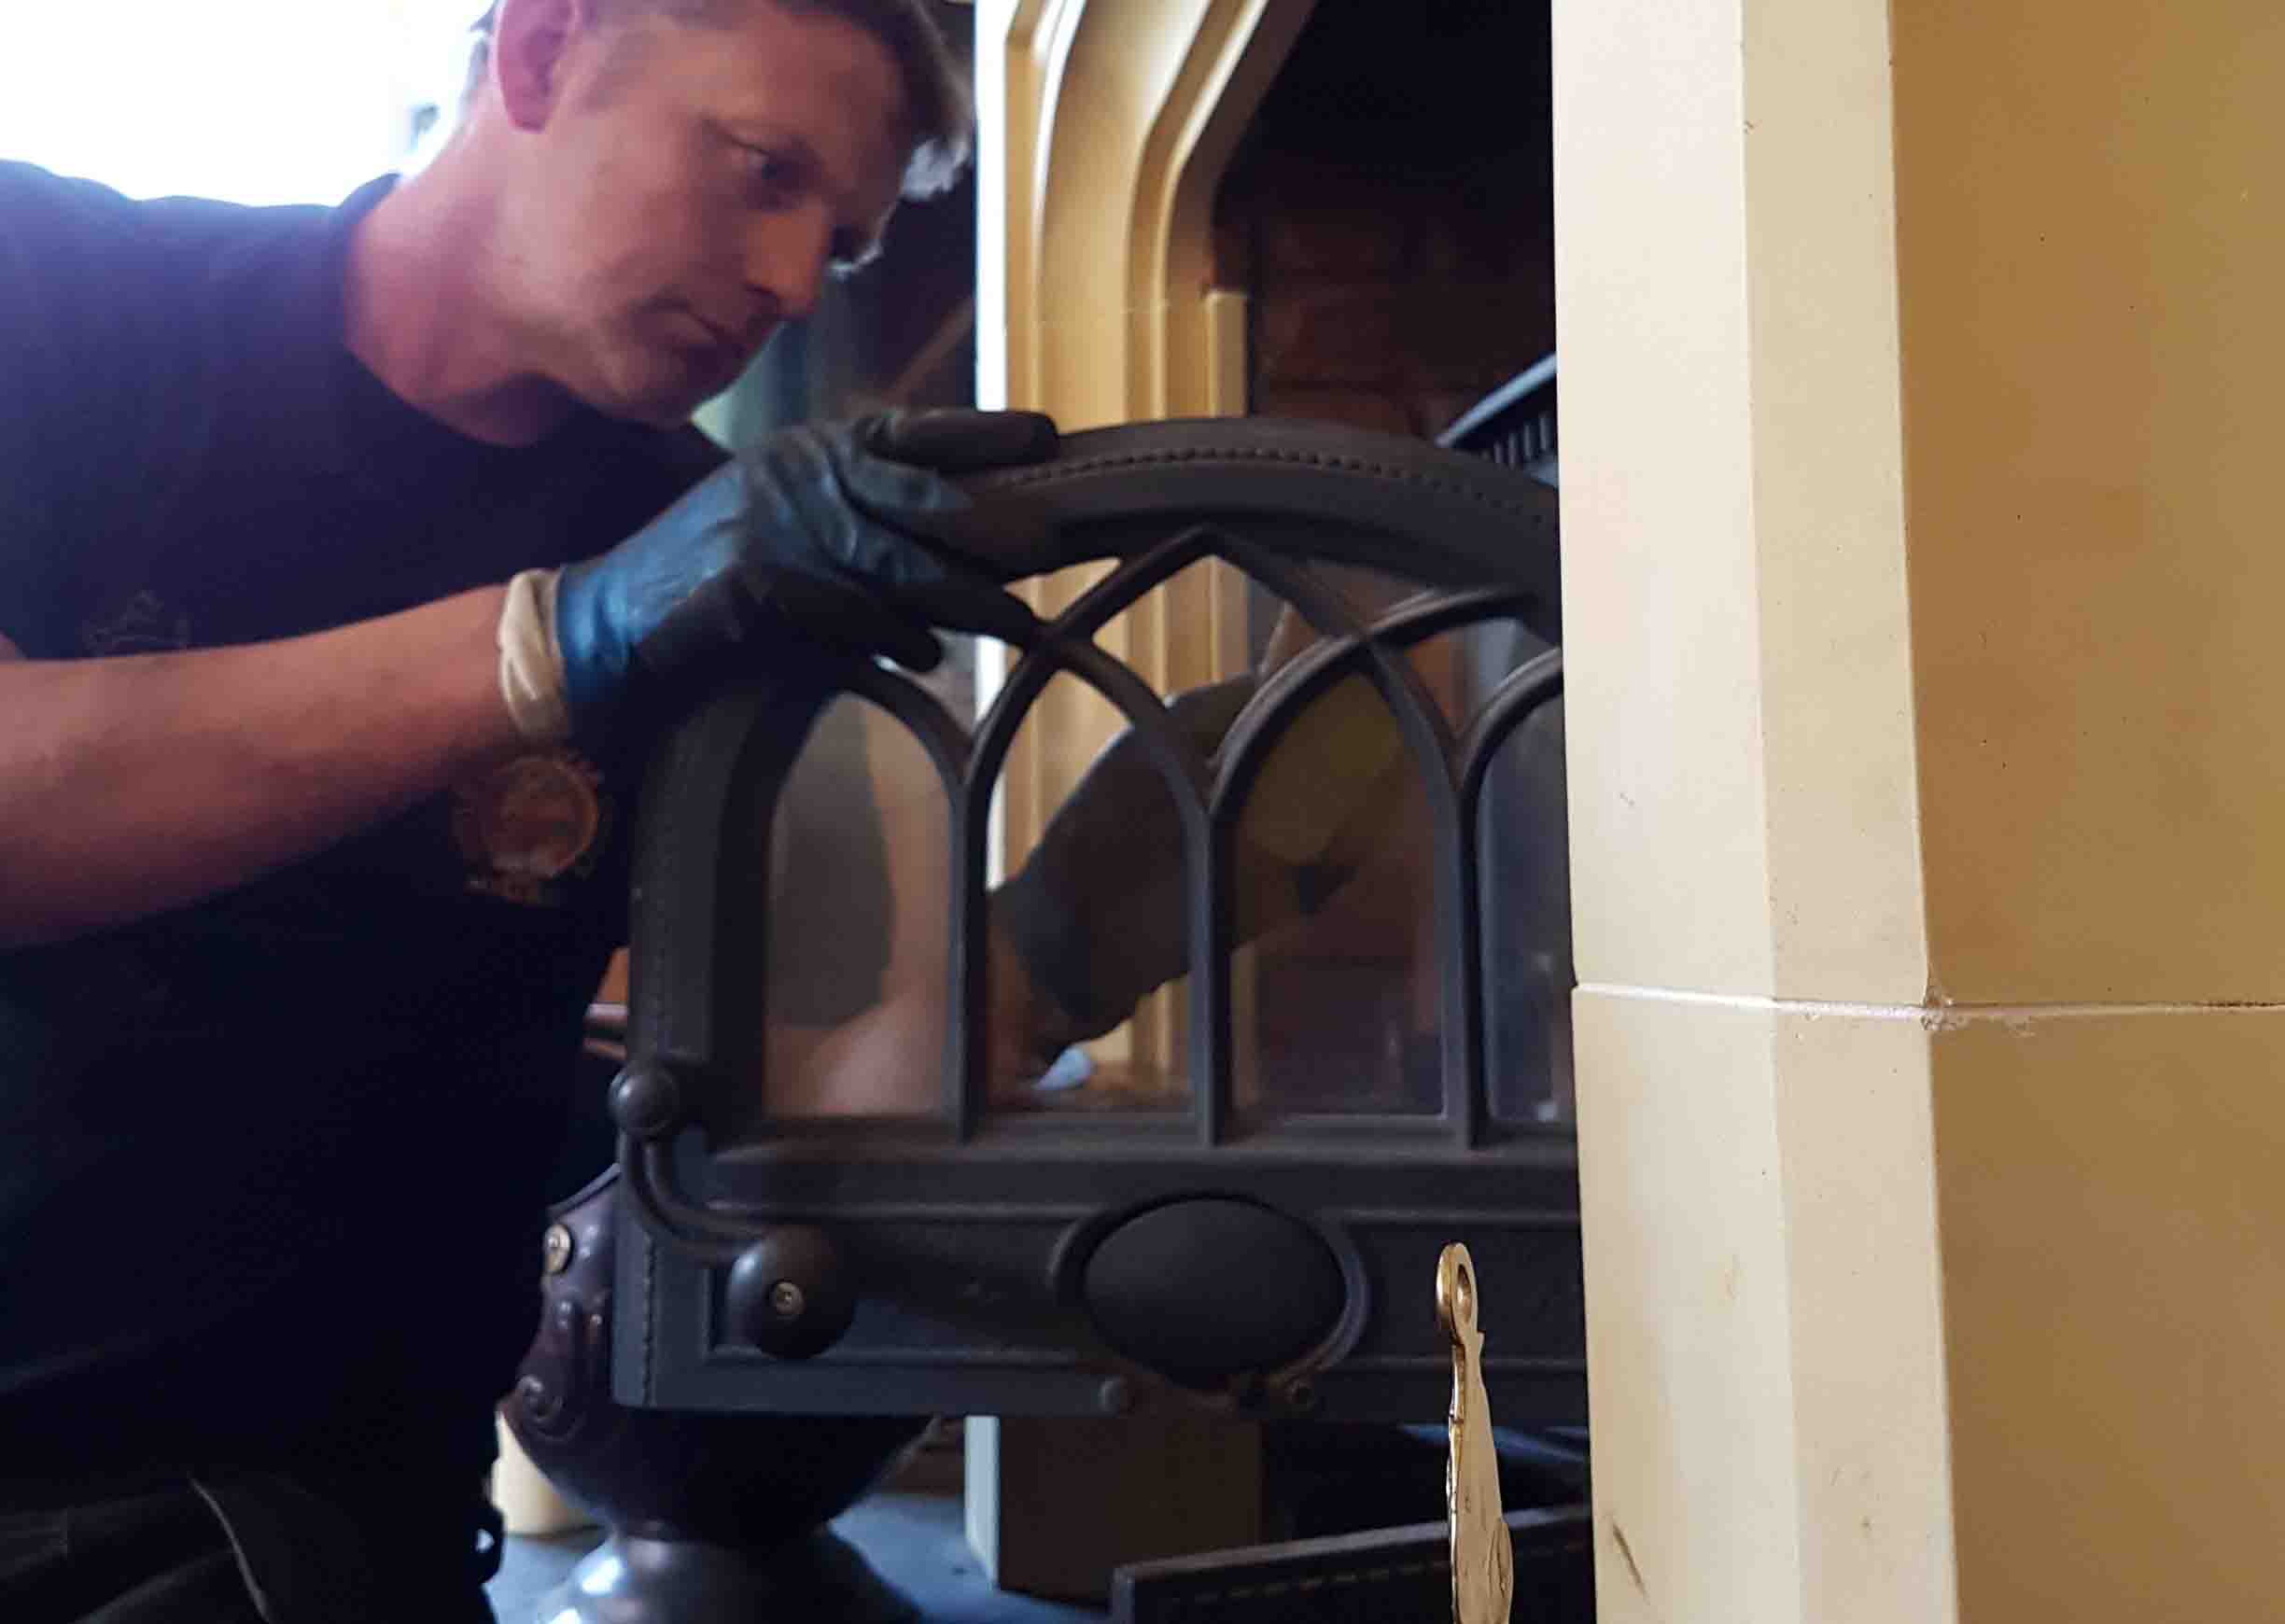 A Chimney Sweep servicing stove